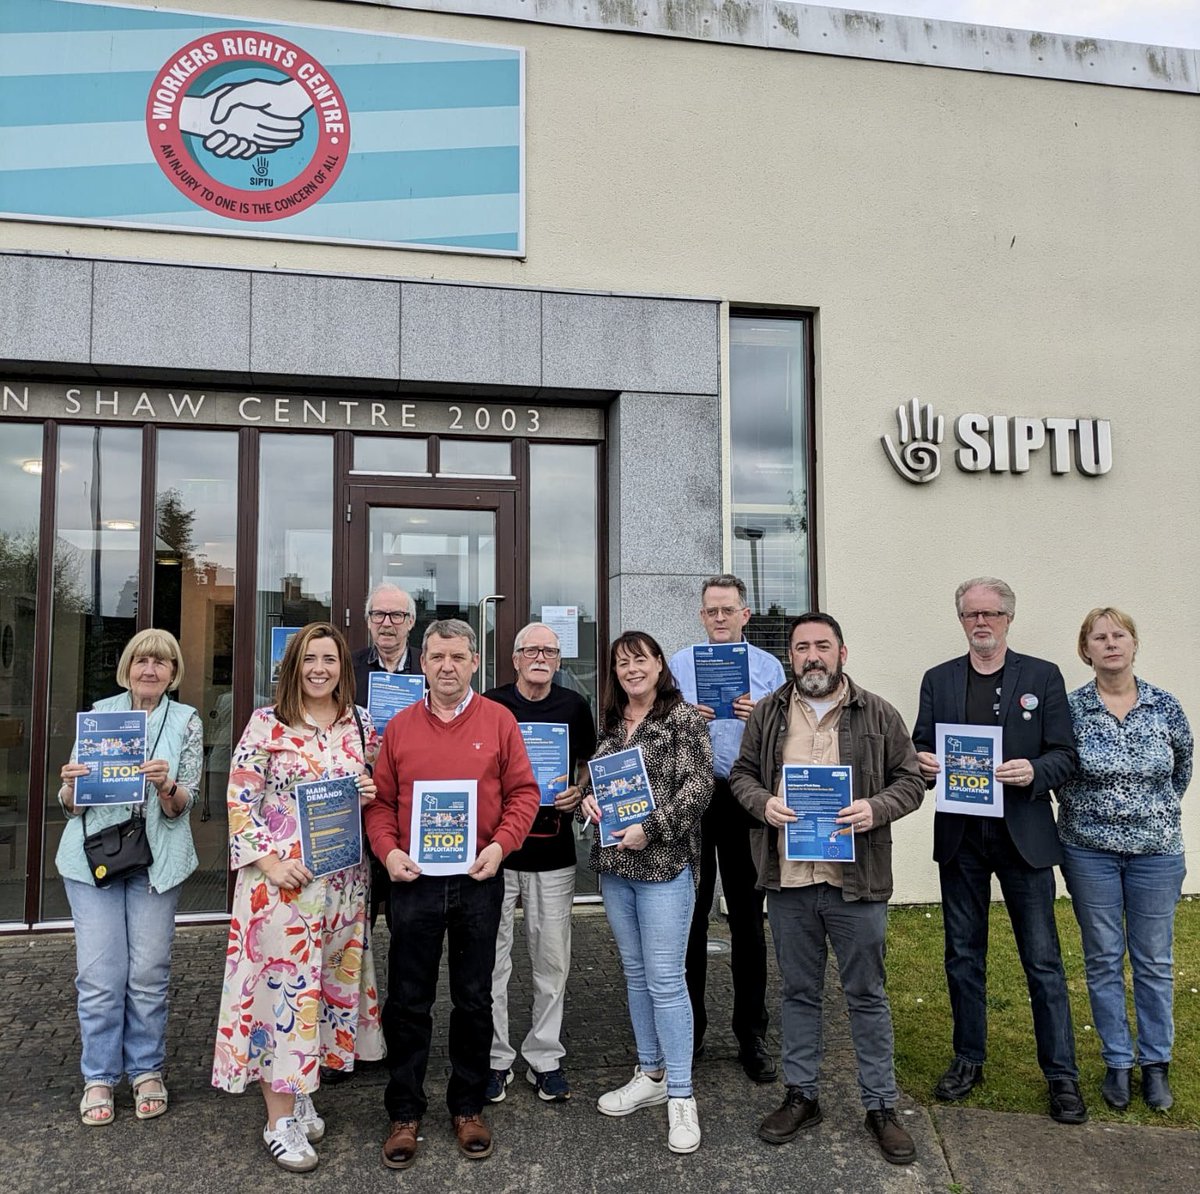 A bumper packed day with Michelle in Navan. An inspirational morning with Ger & Niall in TAG Meath Autism Group, followed by a visit to Daoine Óga childcare. We finished the day with a meeting in the Dan Shaw centre with SIPTU representatives. 30 days until election day 🗳️